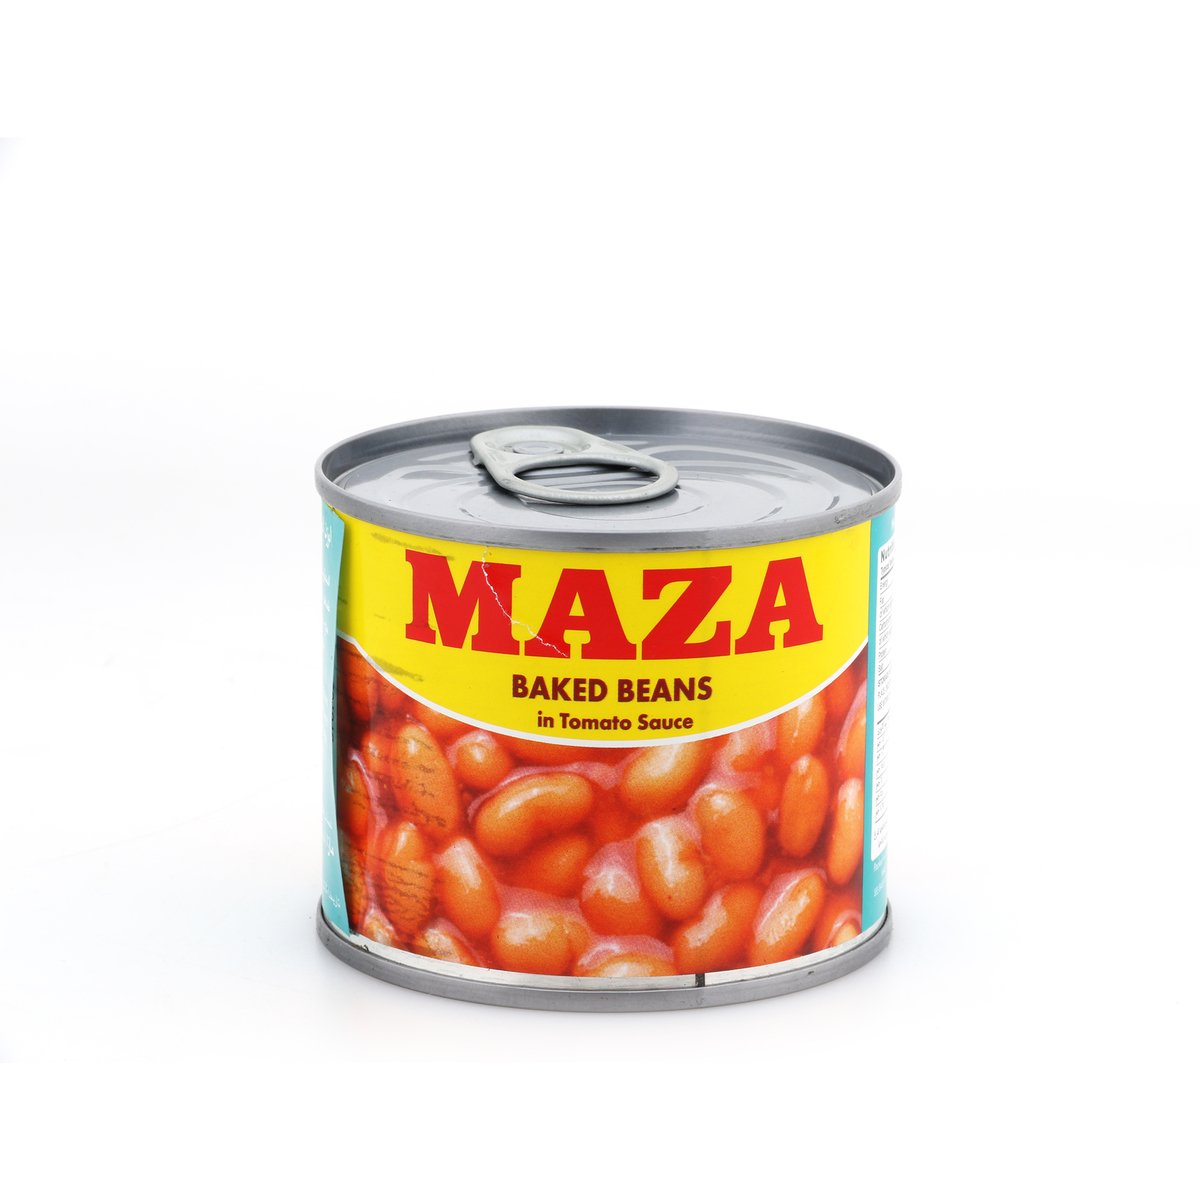 Maza Baked Beans in Tomato Sauce 220g